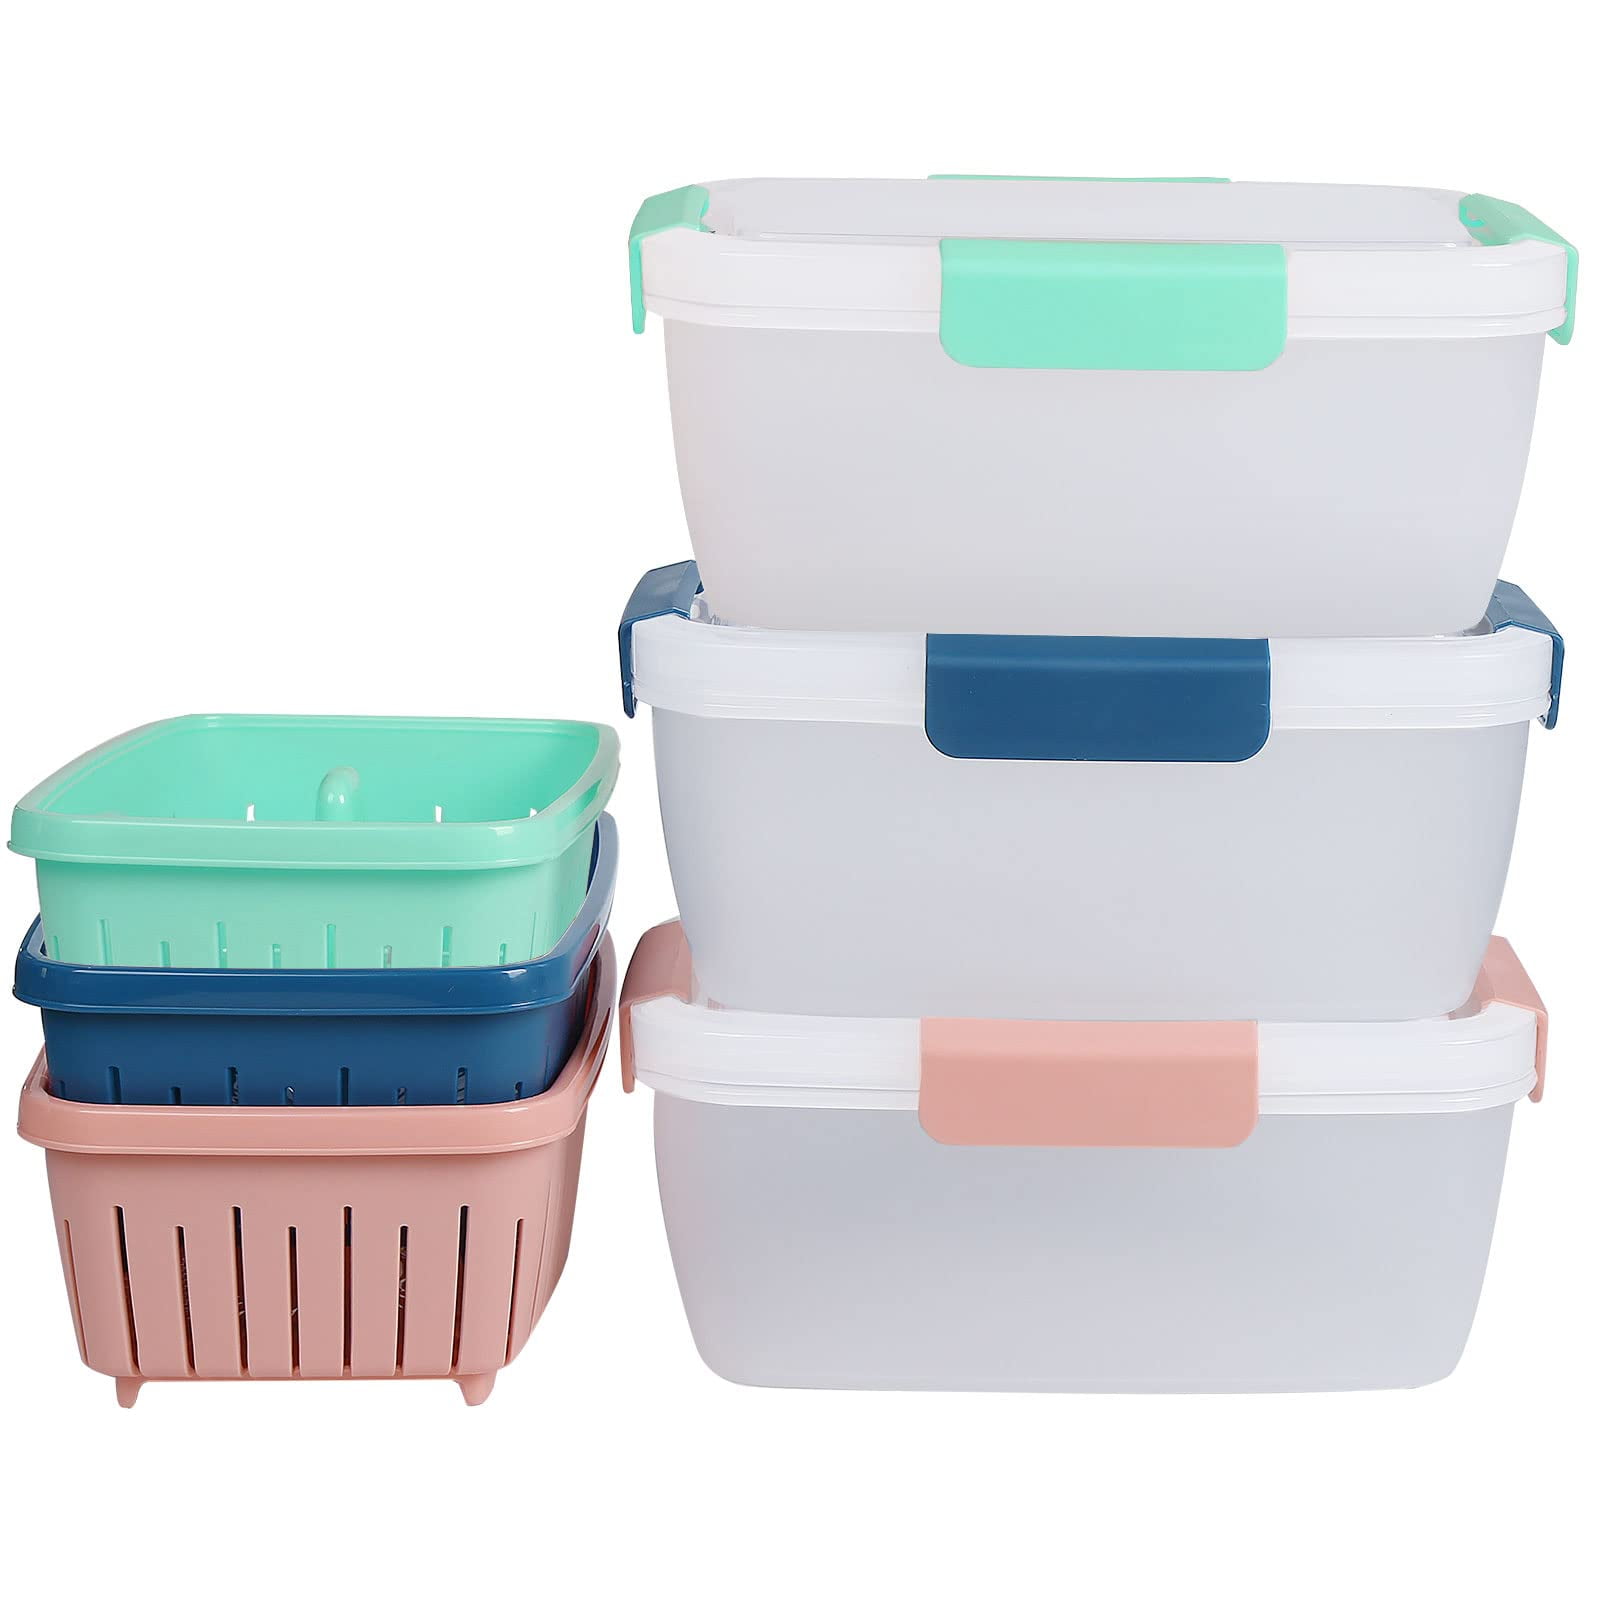 shopwithgreen 3 Pack 68oz Berry Keeper Container, Fruit Produce Saver Food  Storage Containers with Removable Drain Colanders, Vegetable Fresh Keeper  Set